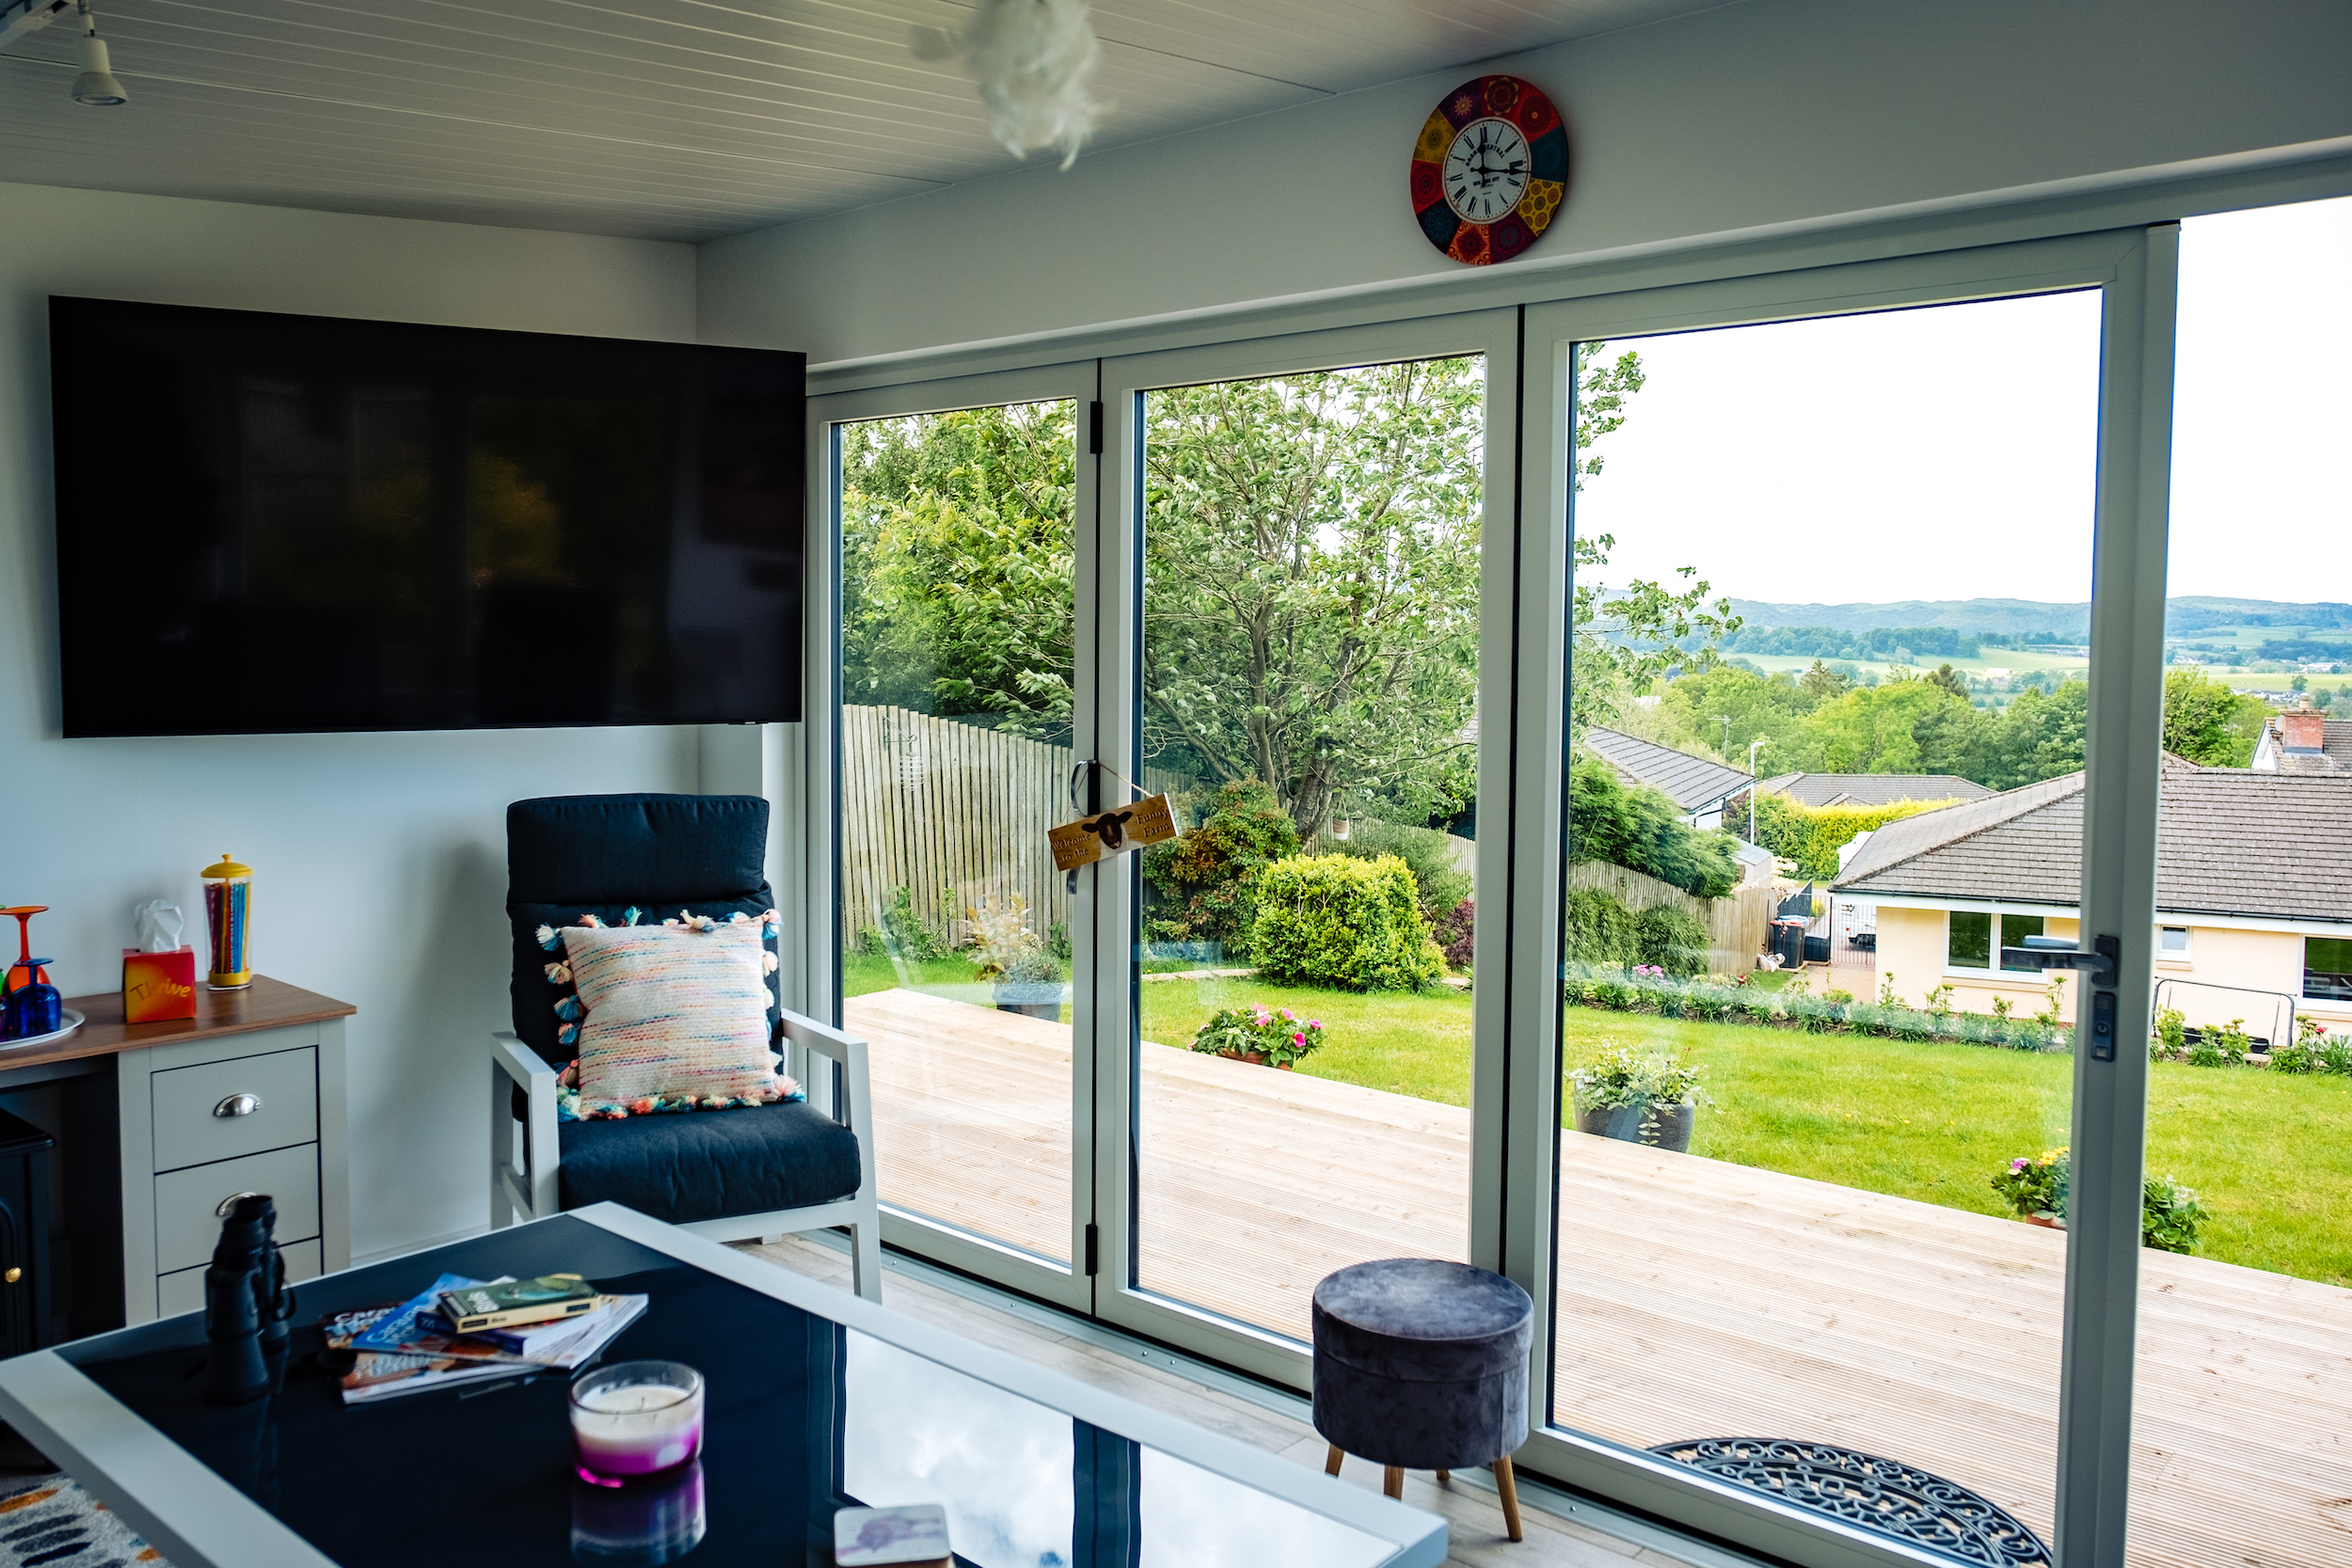 About Us Garden Rooms Scotland room with a view out over a garden your perfect garden room